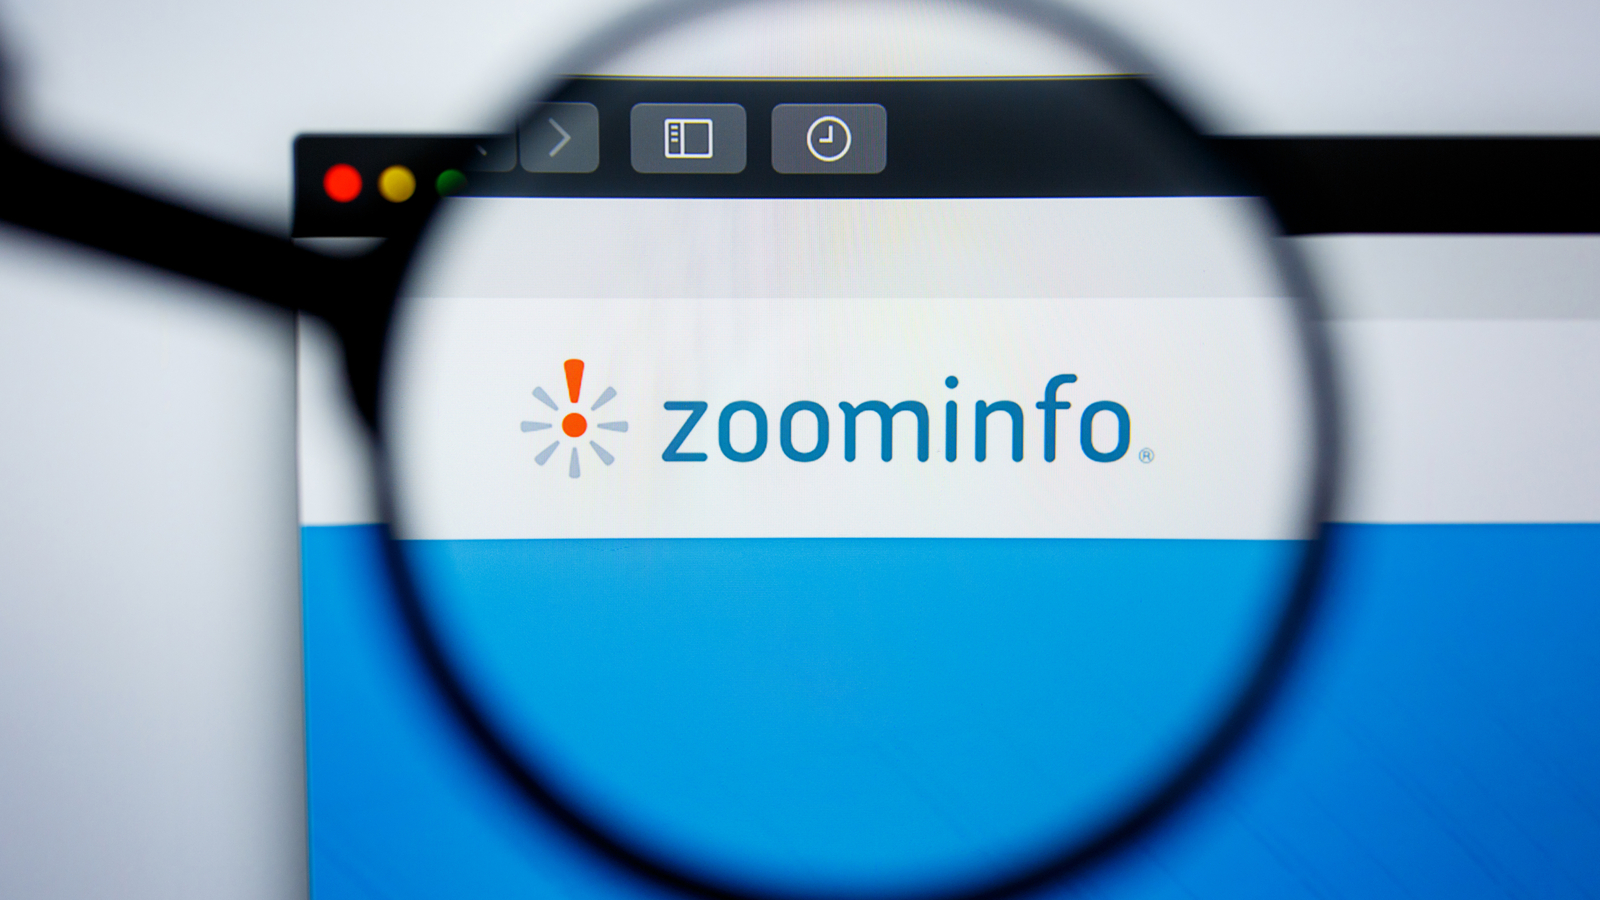 ZI Stock. Illustrative Editorial of ZOOMINFO.COM website homepage. ZOOMINFO logo visible on display screen.